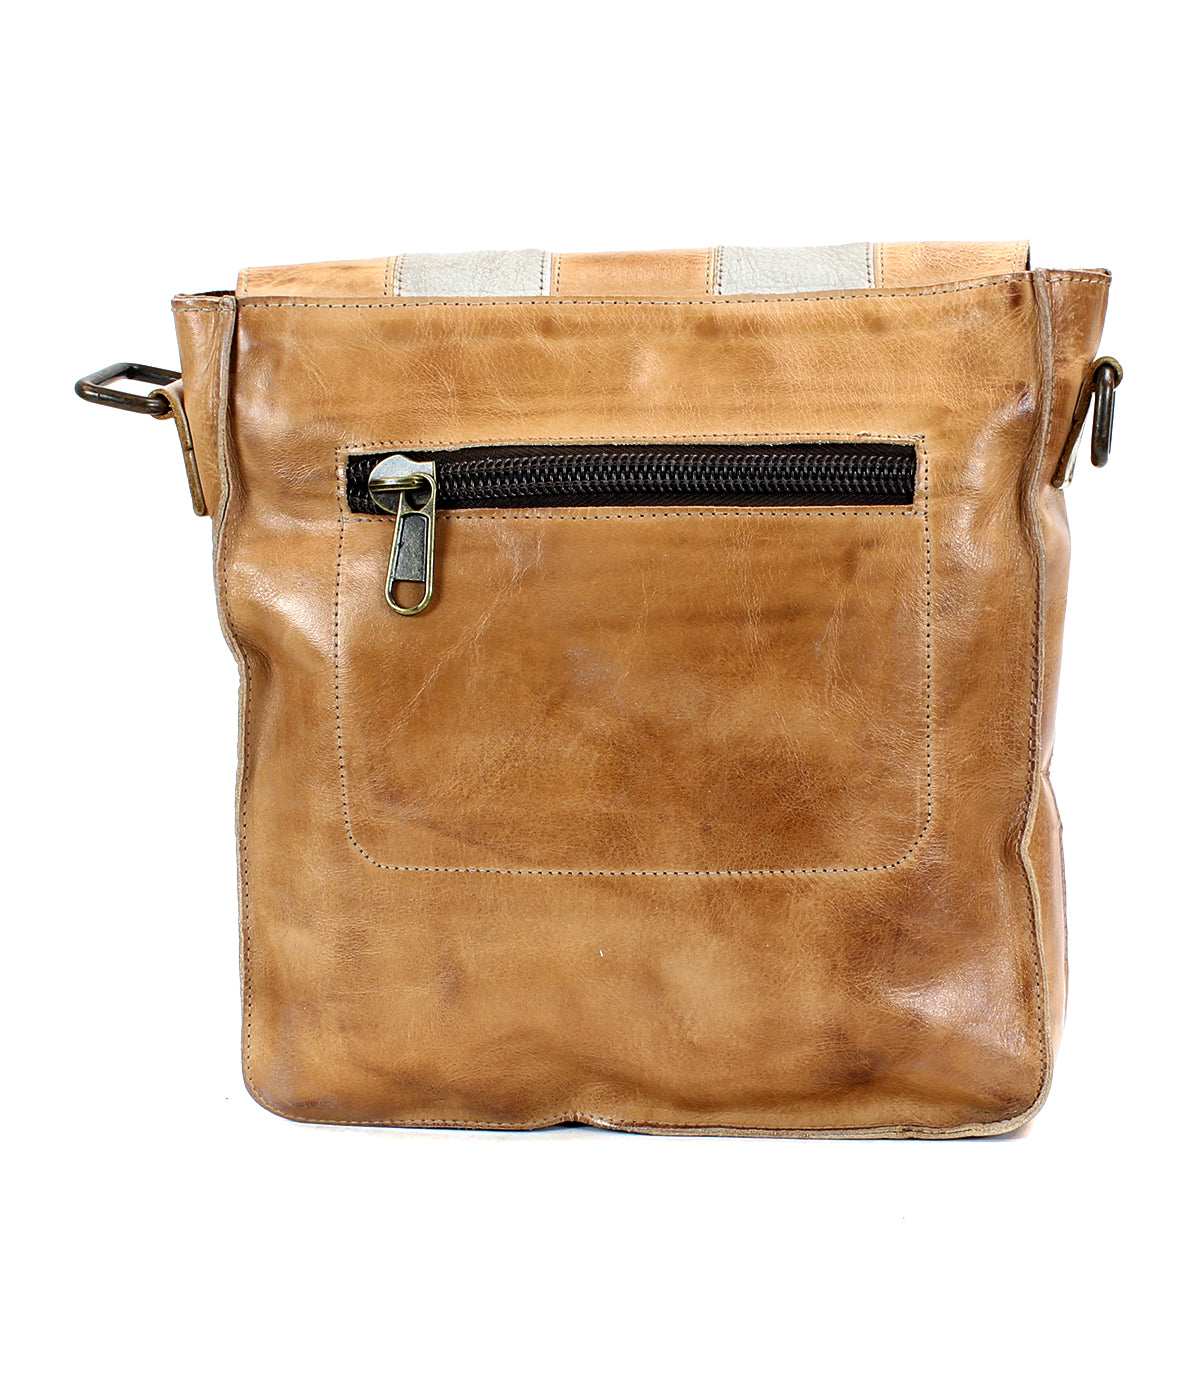 A worn, tan leather Bed Stu Venice Beach II crossbody bag with a checkered front panel, displayed against a white background.